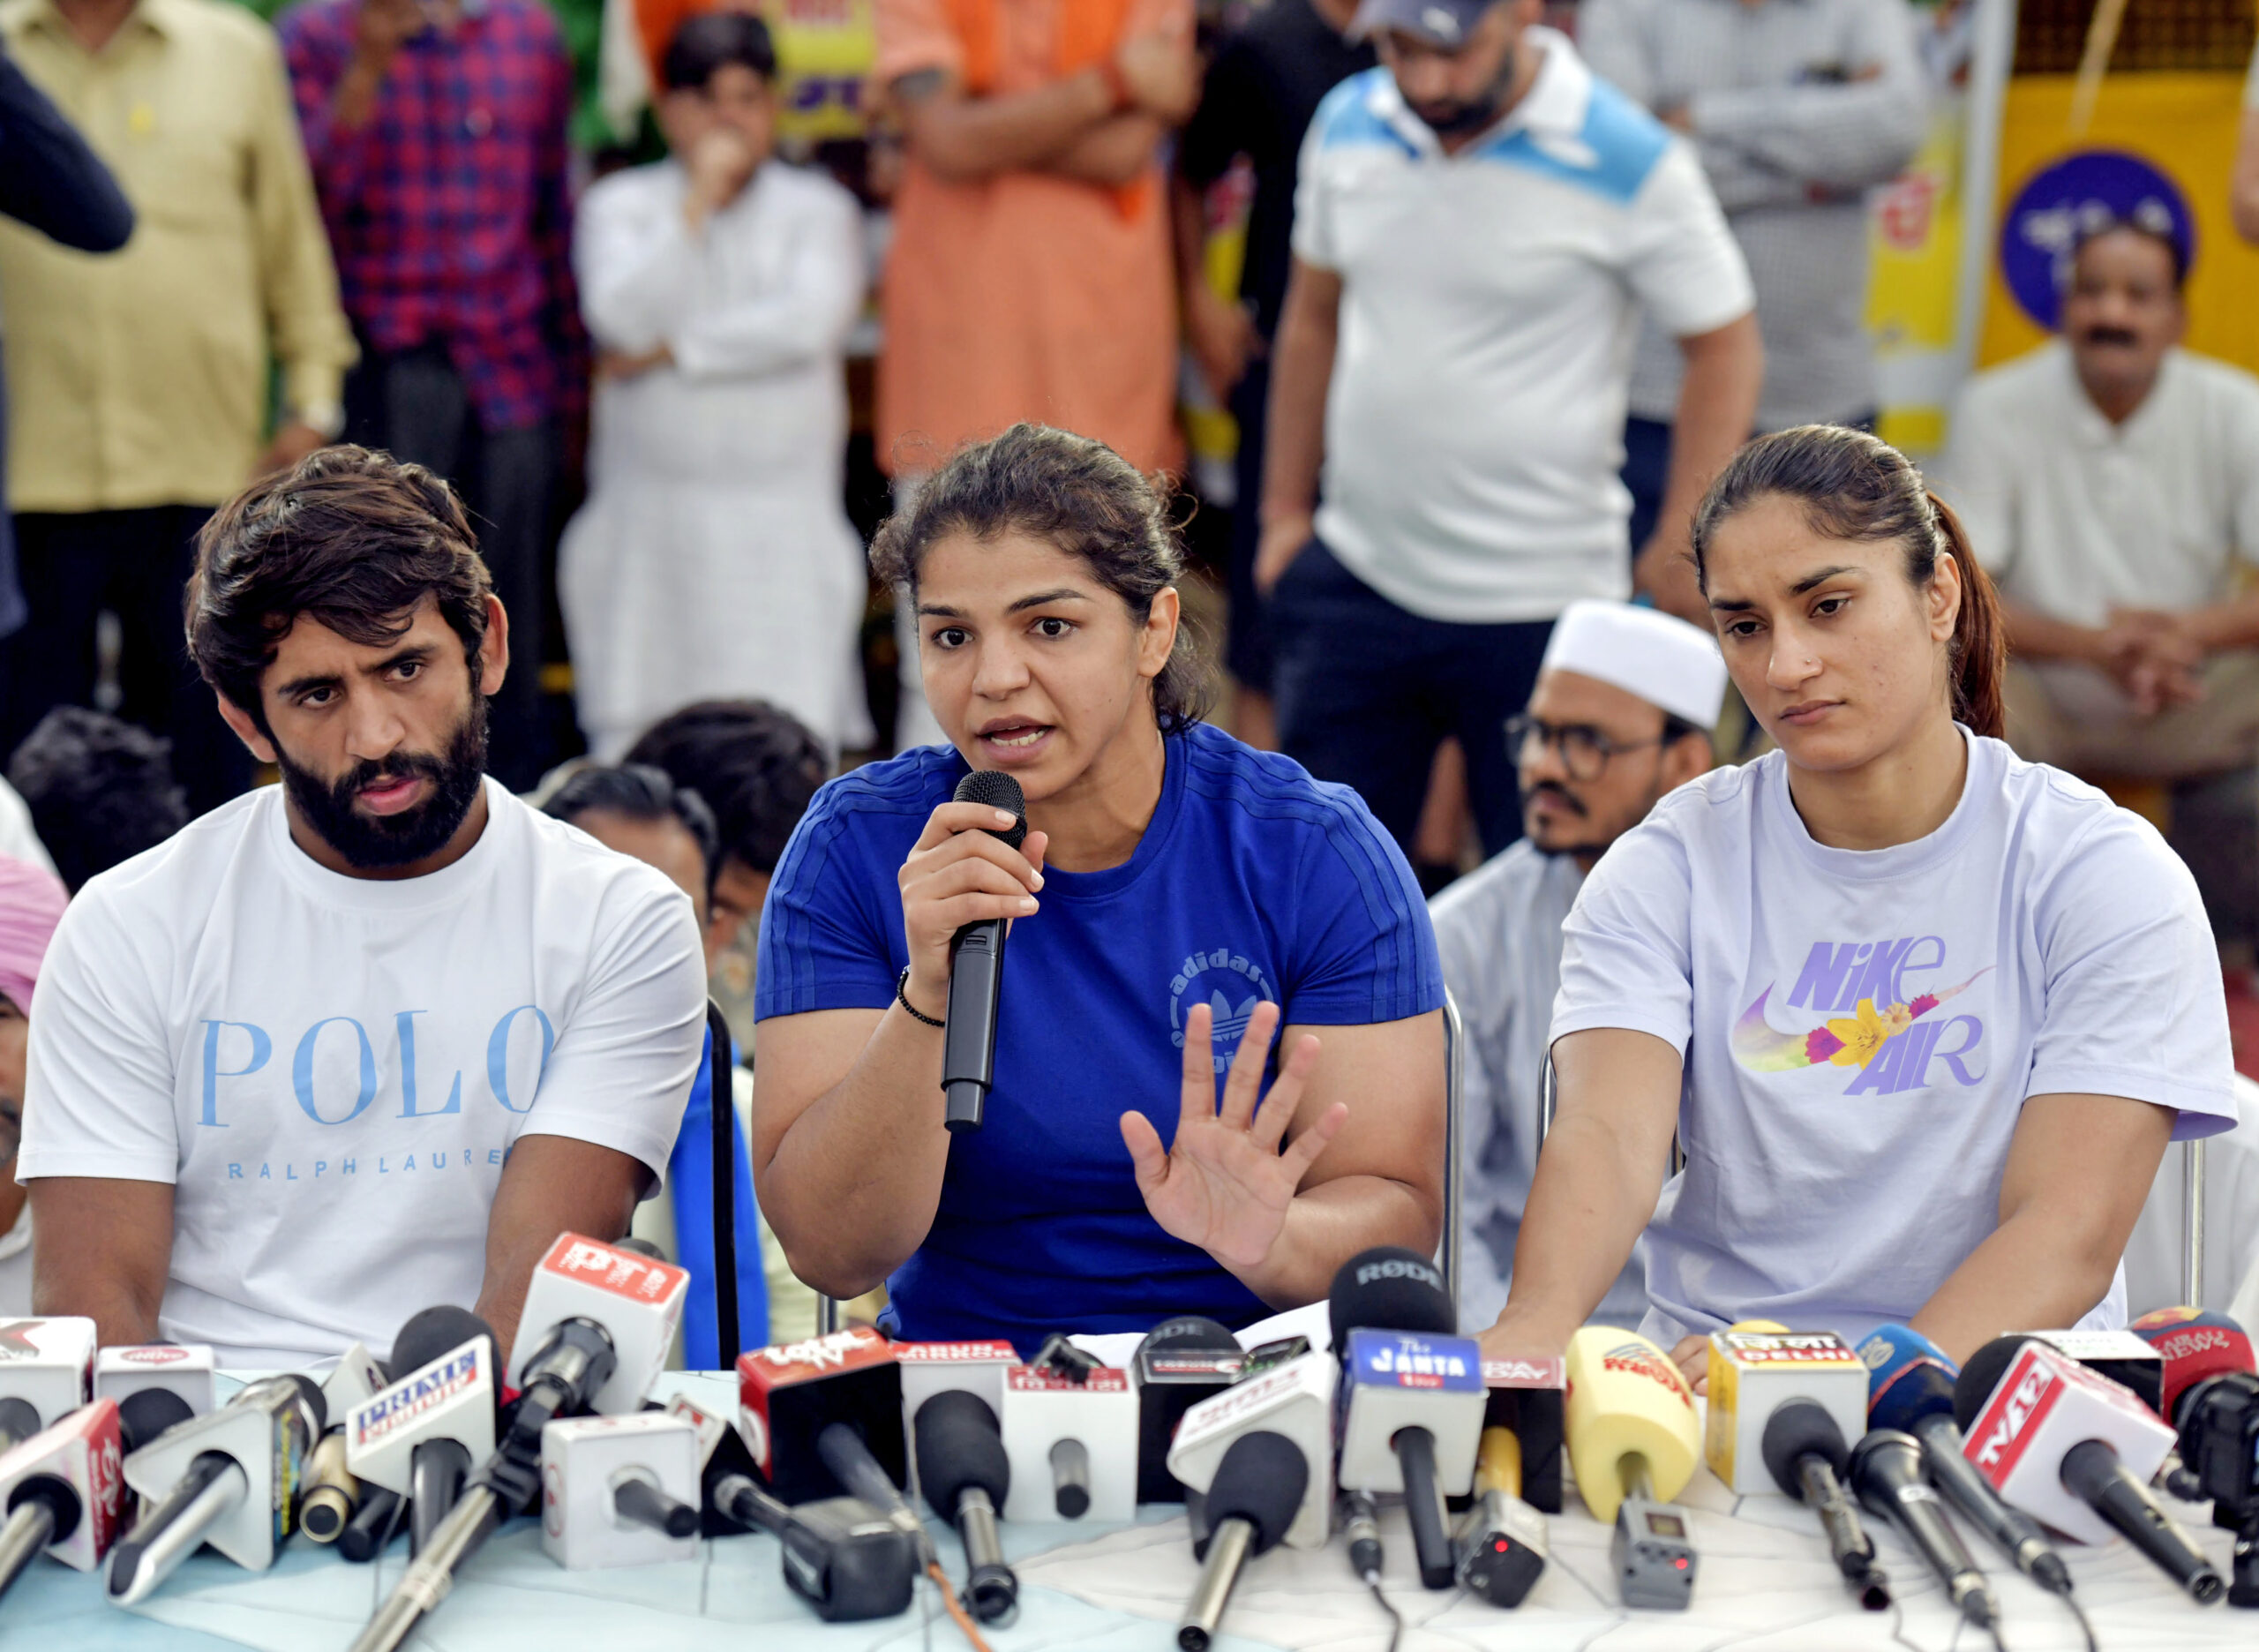 “Fight will continue in court, not on roads”: Wrestlers’ protest against WFI president